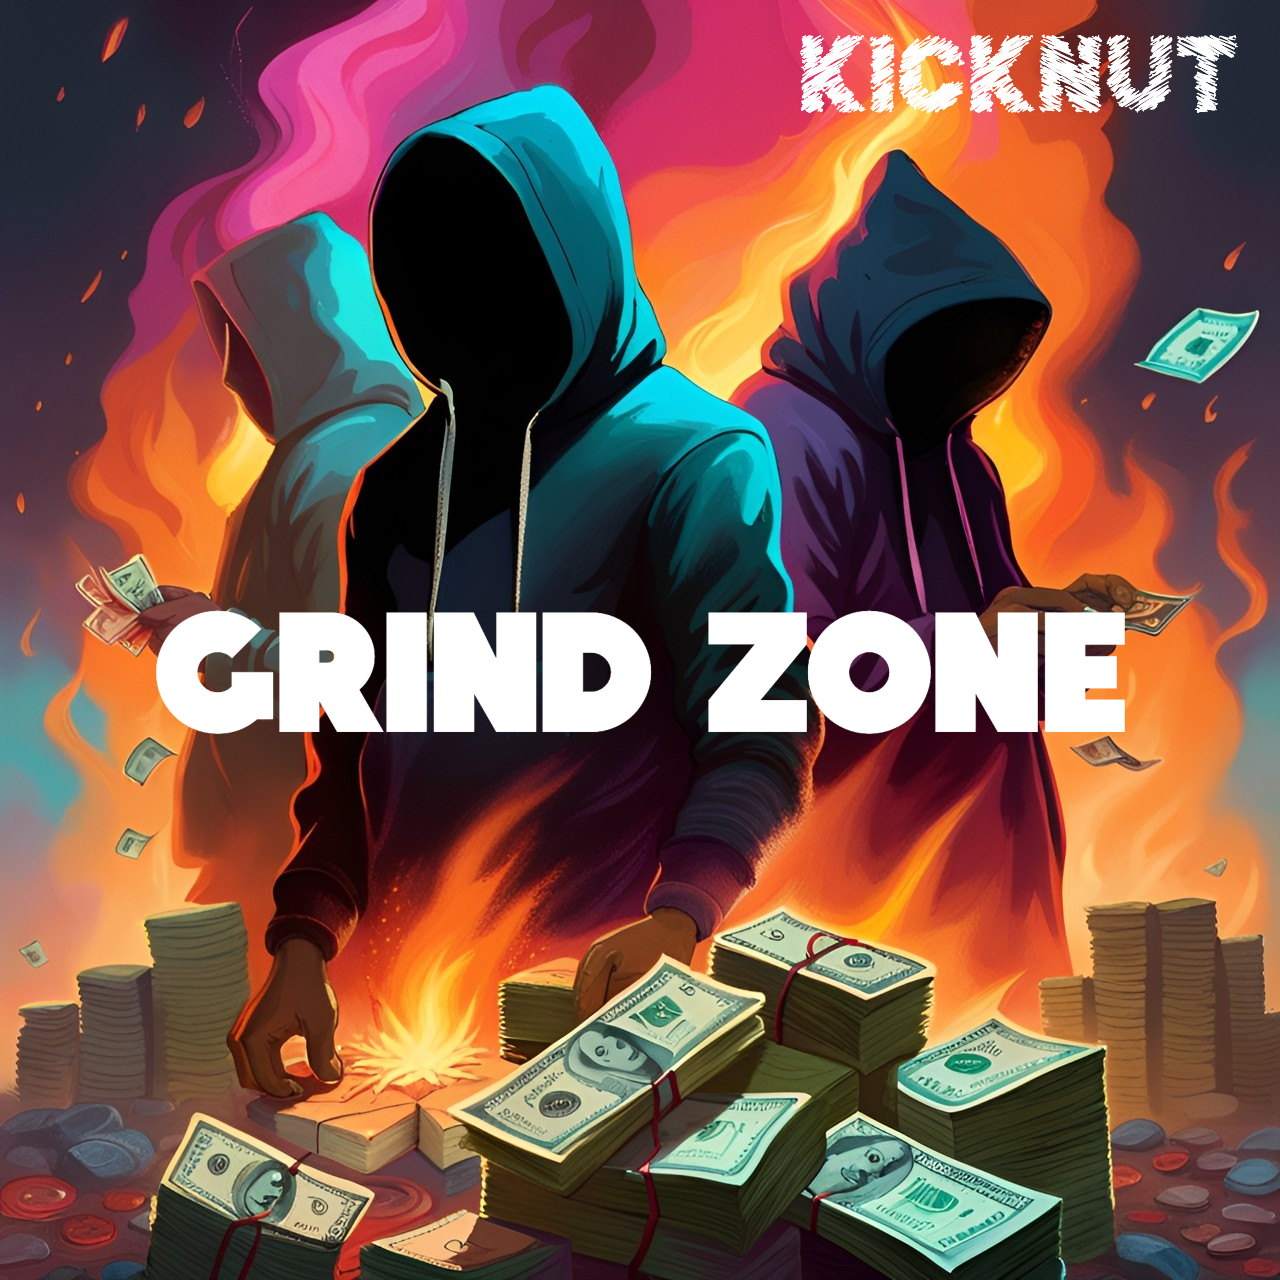 KICKNUT Unleashes Debut Single "Grind Zone" - A High-Octane Anthem for the Hustlers